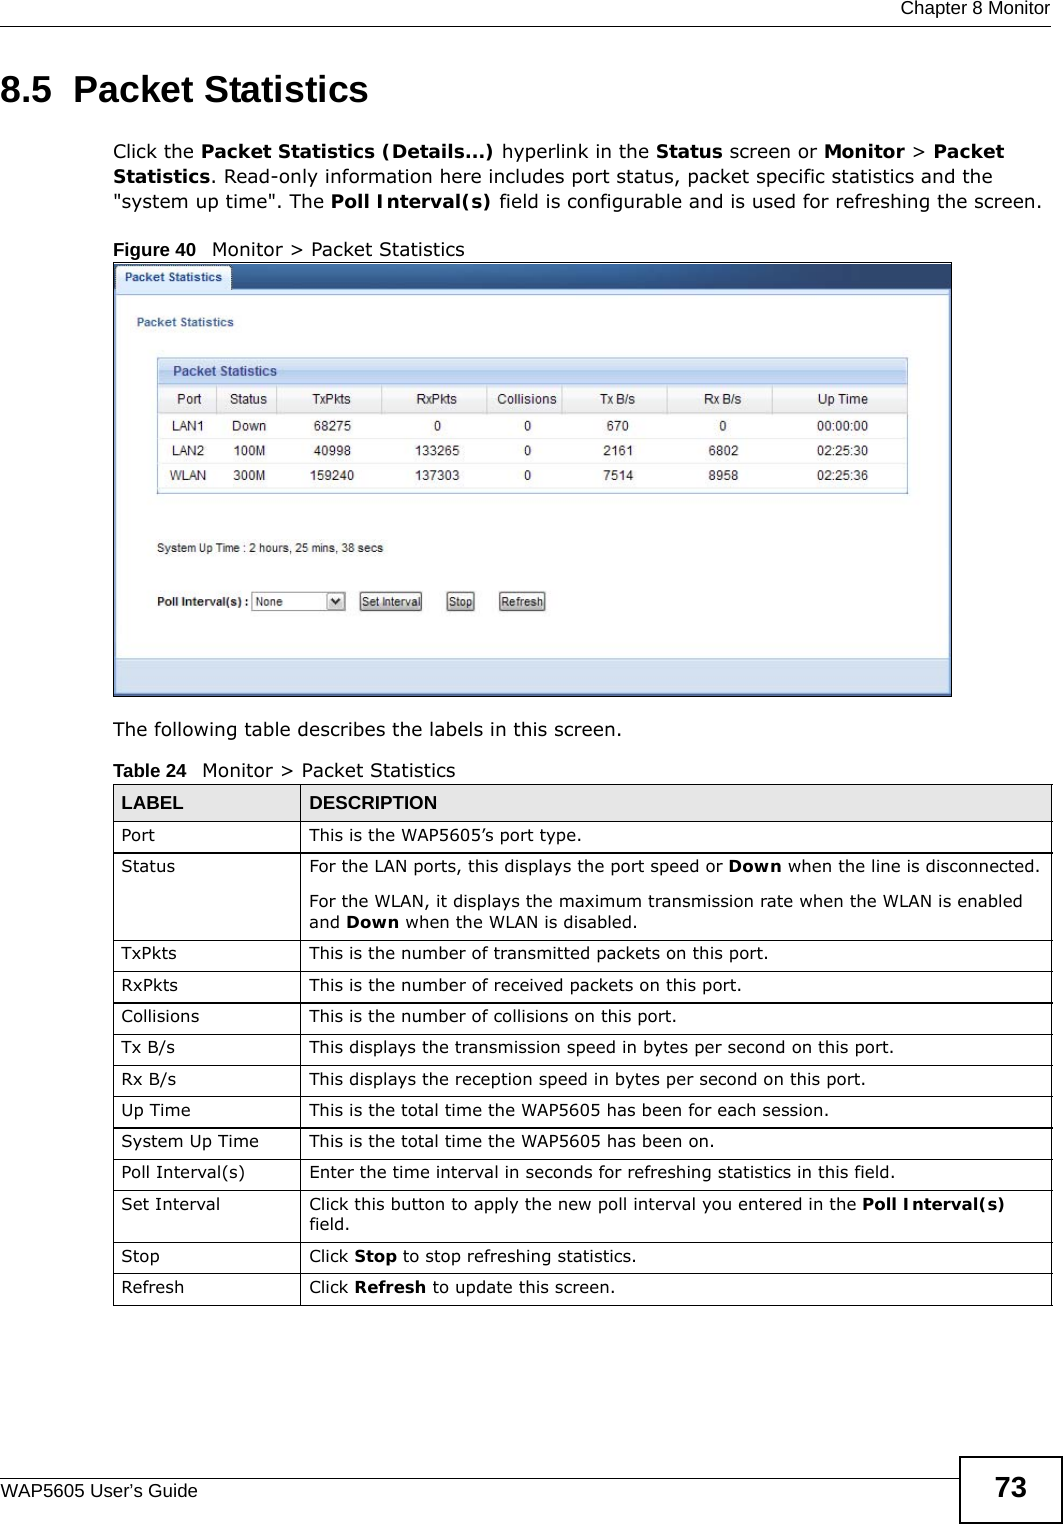  Chapter 8 MonitorWAP5605 User’s Guide 738.5  Packet Statistics   Click the Packet Statistics (Details...) hyperlink in the Status screen or Monitor &gt; Packet Statistics. Read-only information here includes port status, packet specific statistics and the &quot;system up time&quot;. The Poll Interval(s) field is configurable and is used for refreshing the screen.Figure 40   Monitor &gt; Packet Statistics The following table describes the labels in this screen. Table 24   Monitor &gt; Packet StatisticsLABEL DESCRIPTIONPort This is the WAP5605’s port type.Status  For the LAN ports, this displays the port speed or Down when the line is disconnected.For the WLAN, it displays the maximum transmission rate when the WLAN is enabled and Down when the WLAN is disabled.TxPkts  This is the number of transmitted packets on this port.RxPkts  This is the number of received packets on this port.Collisions  This is the number of collisions on this port.Tx B/s  This displays the transmission speed in bytes per second on this port.Rx B/s This displays the reception speed in bytes per second on this port.Up Time This is the total time the WAP5605 has been for each session.System Up Time This is the total time the WAP5605 has been on.Poll Interval(s) Enter the time interval in seconds for refreshing statistics in this field.Set Interval Click this button to apply the new poll interval you entered in the Poll Interval(s) field.Stop Click Stop to stop refreshing statistics.Refresh Click Refresh to update this screen.